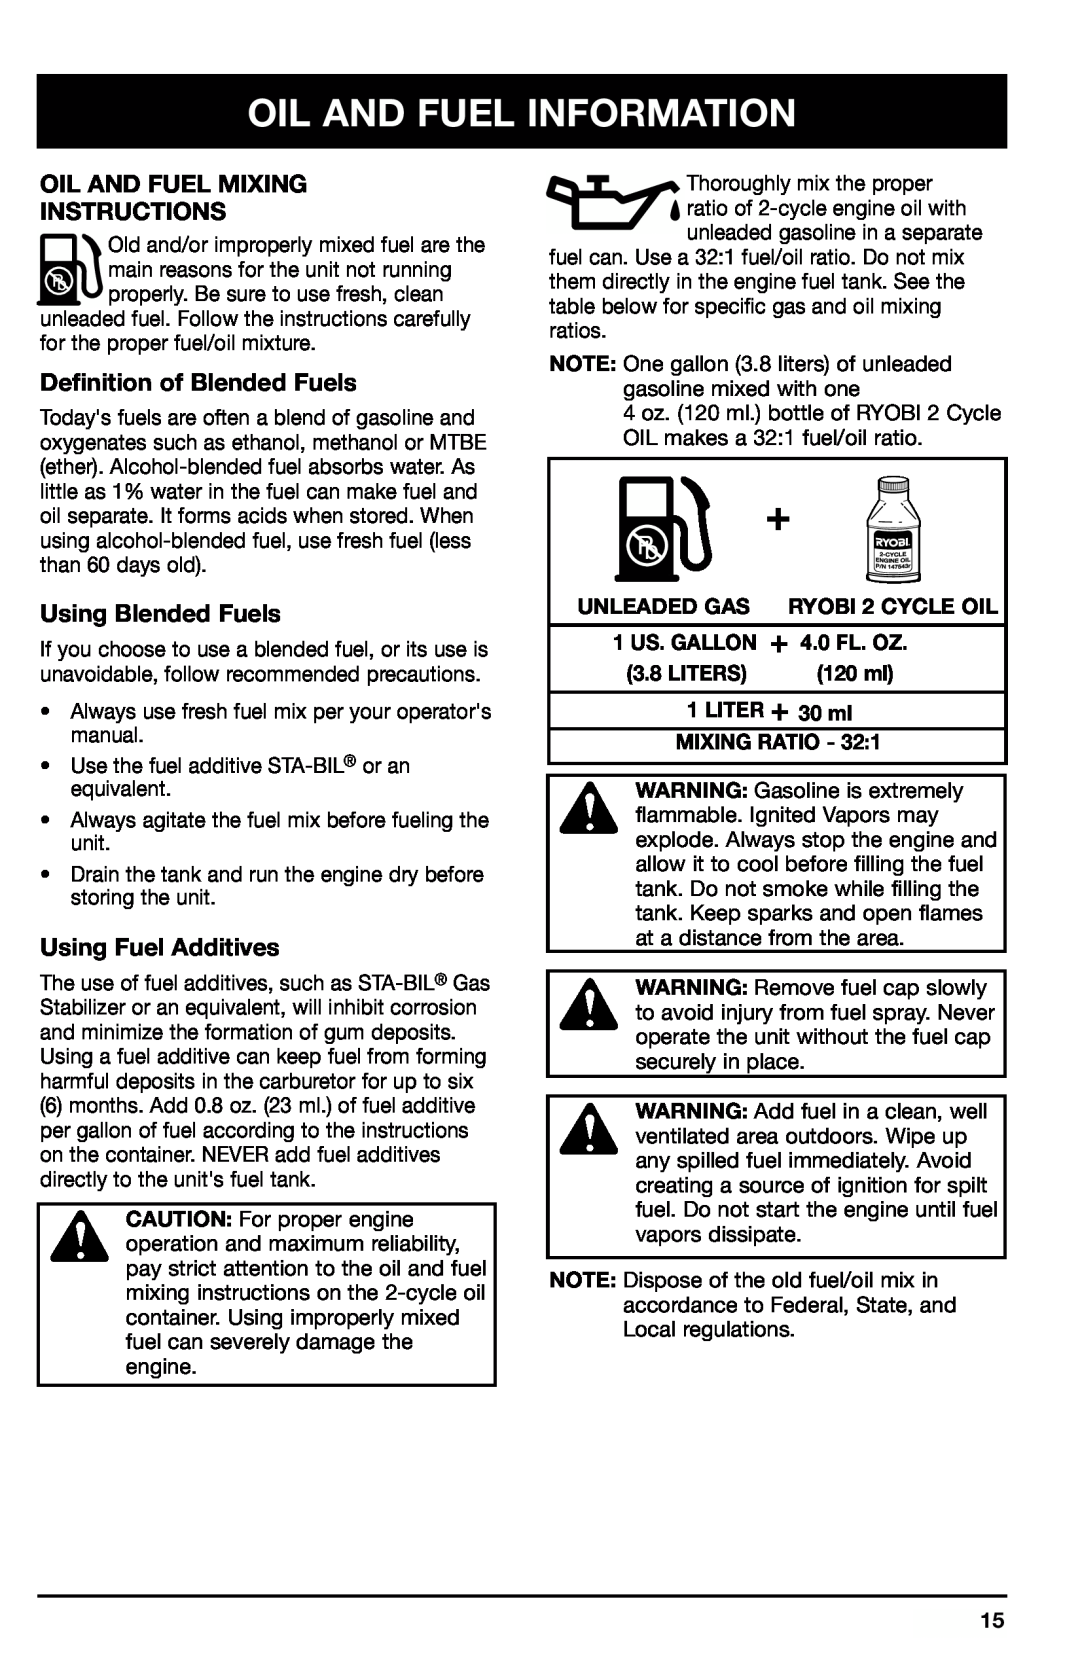 Ryobi 780r Oil And Fuel Information, Oil And Fuel Mixing Instructions, Definition of Blended Fuels, Using Blended Fuels 